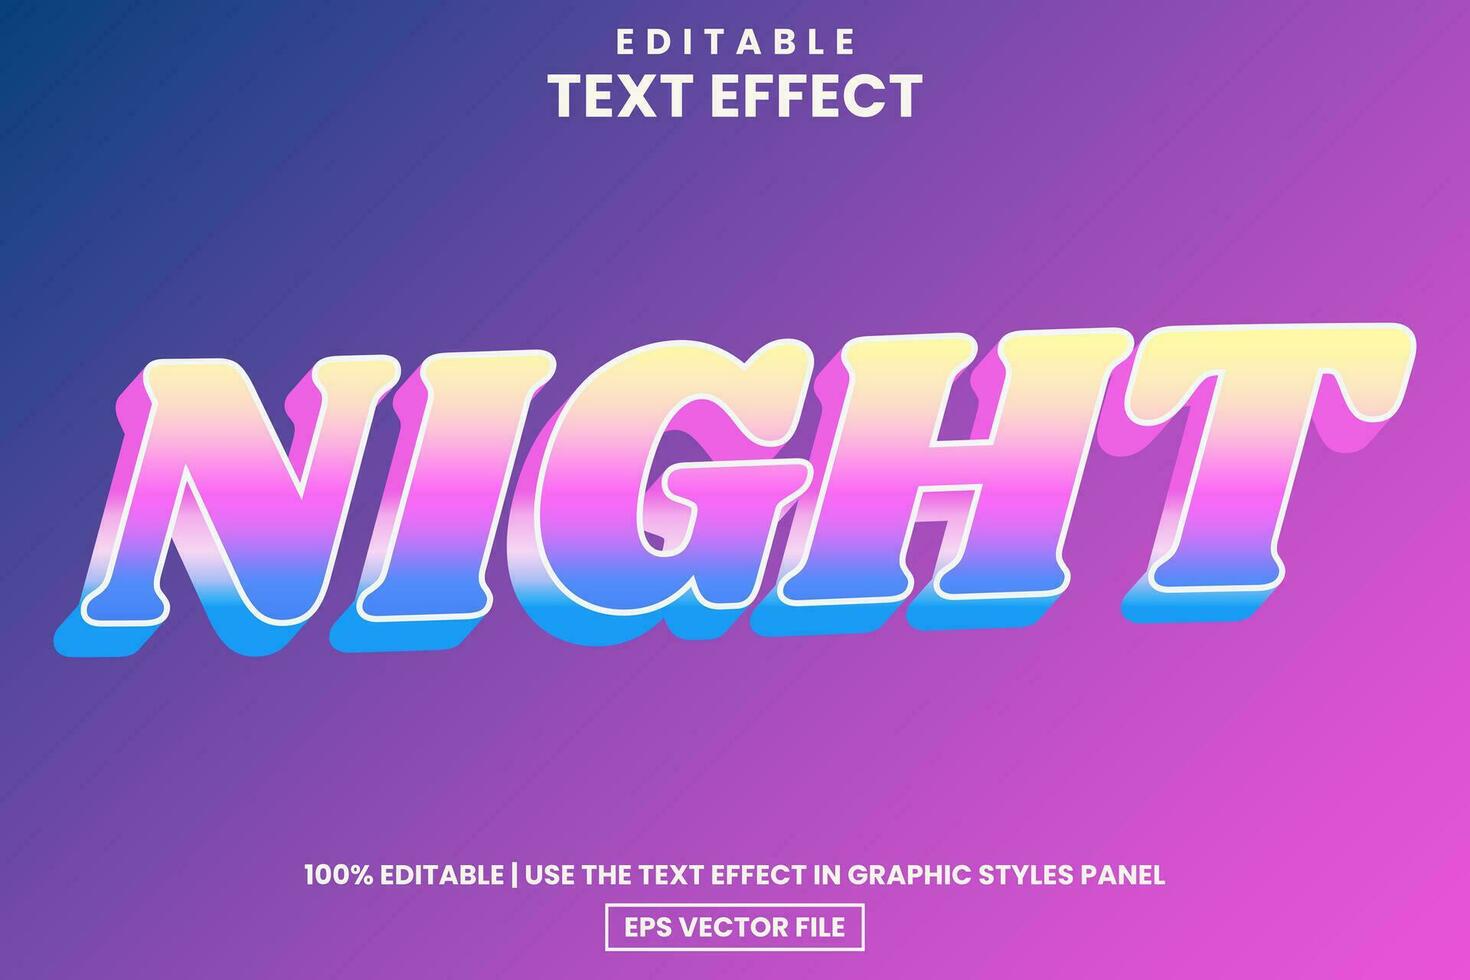 Colorful glow modern 3D night text style editable text effect template vector